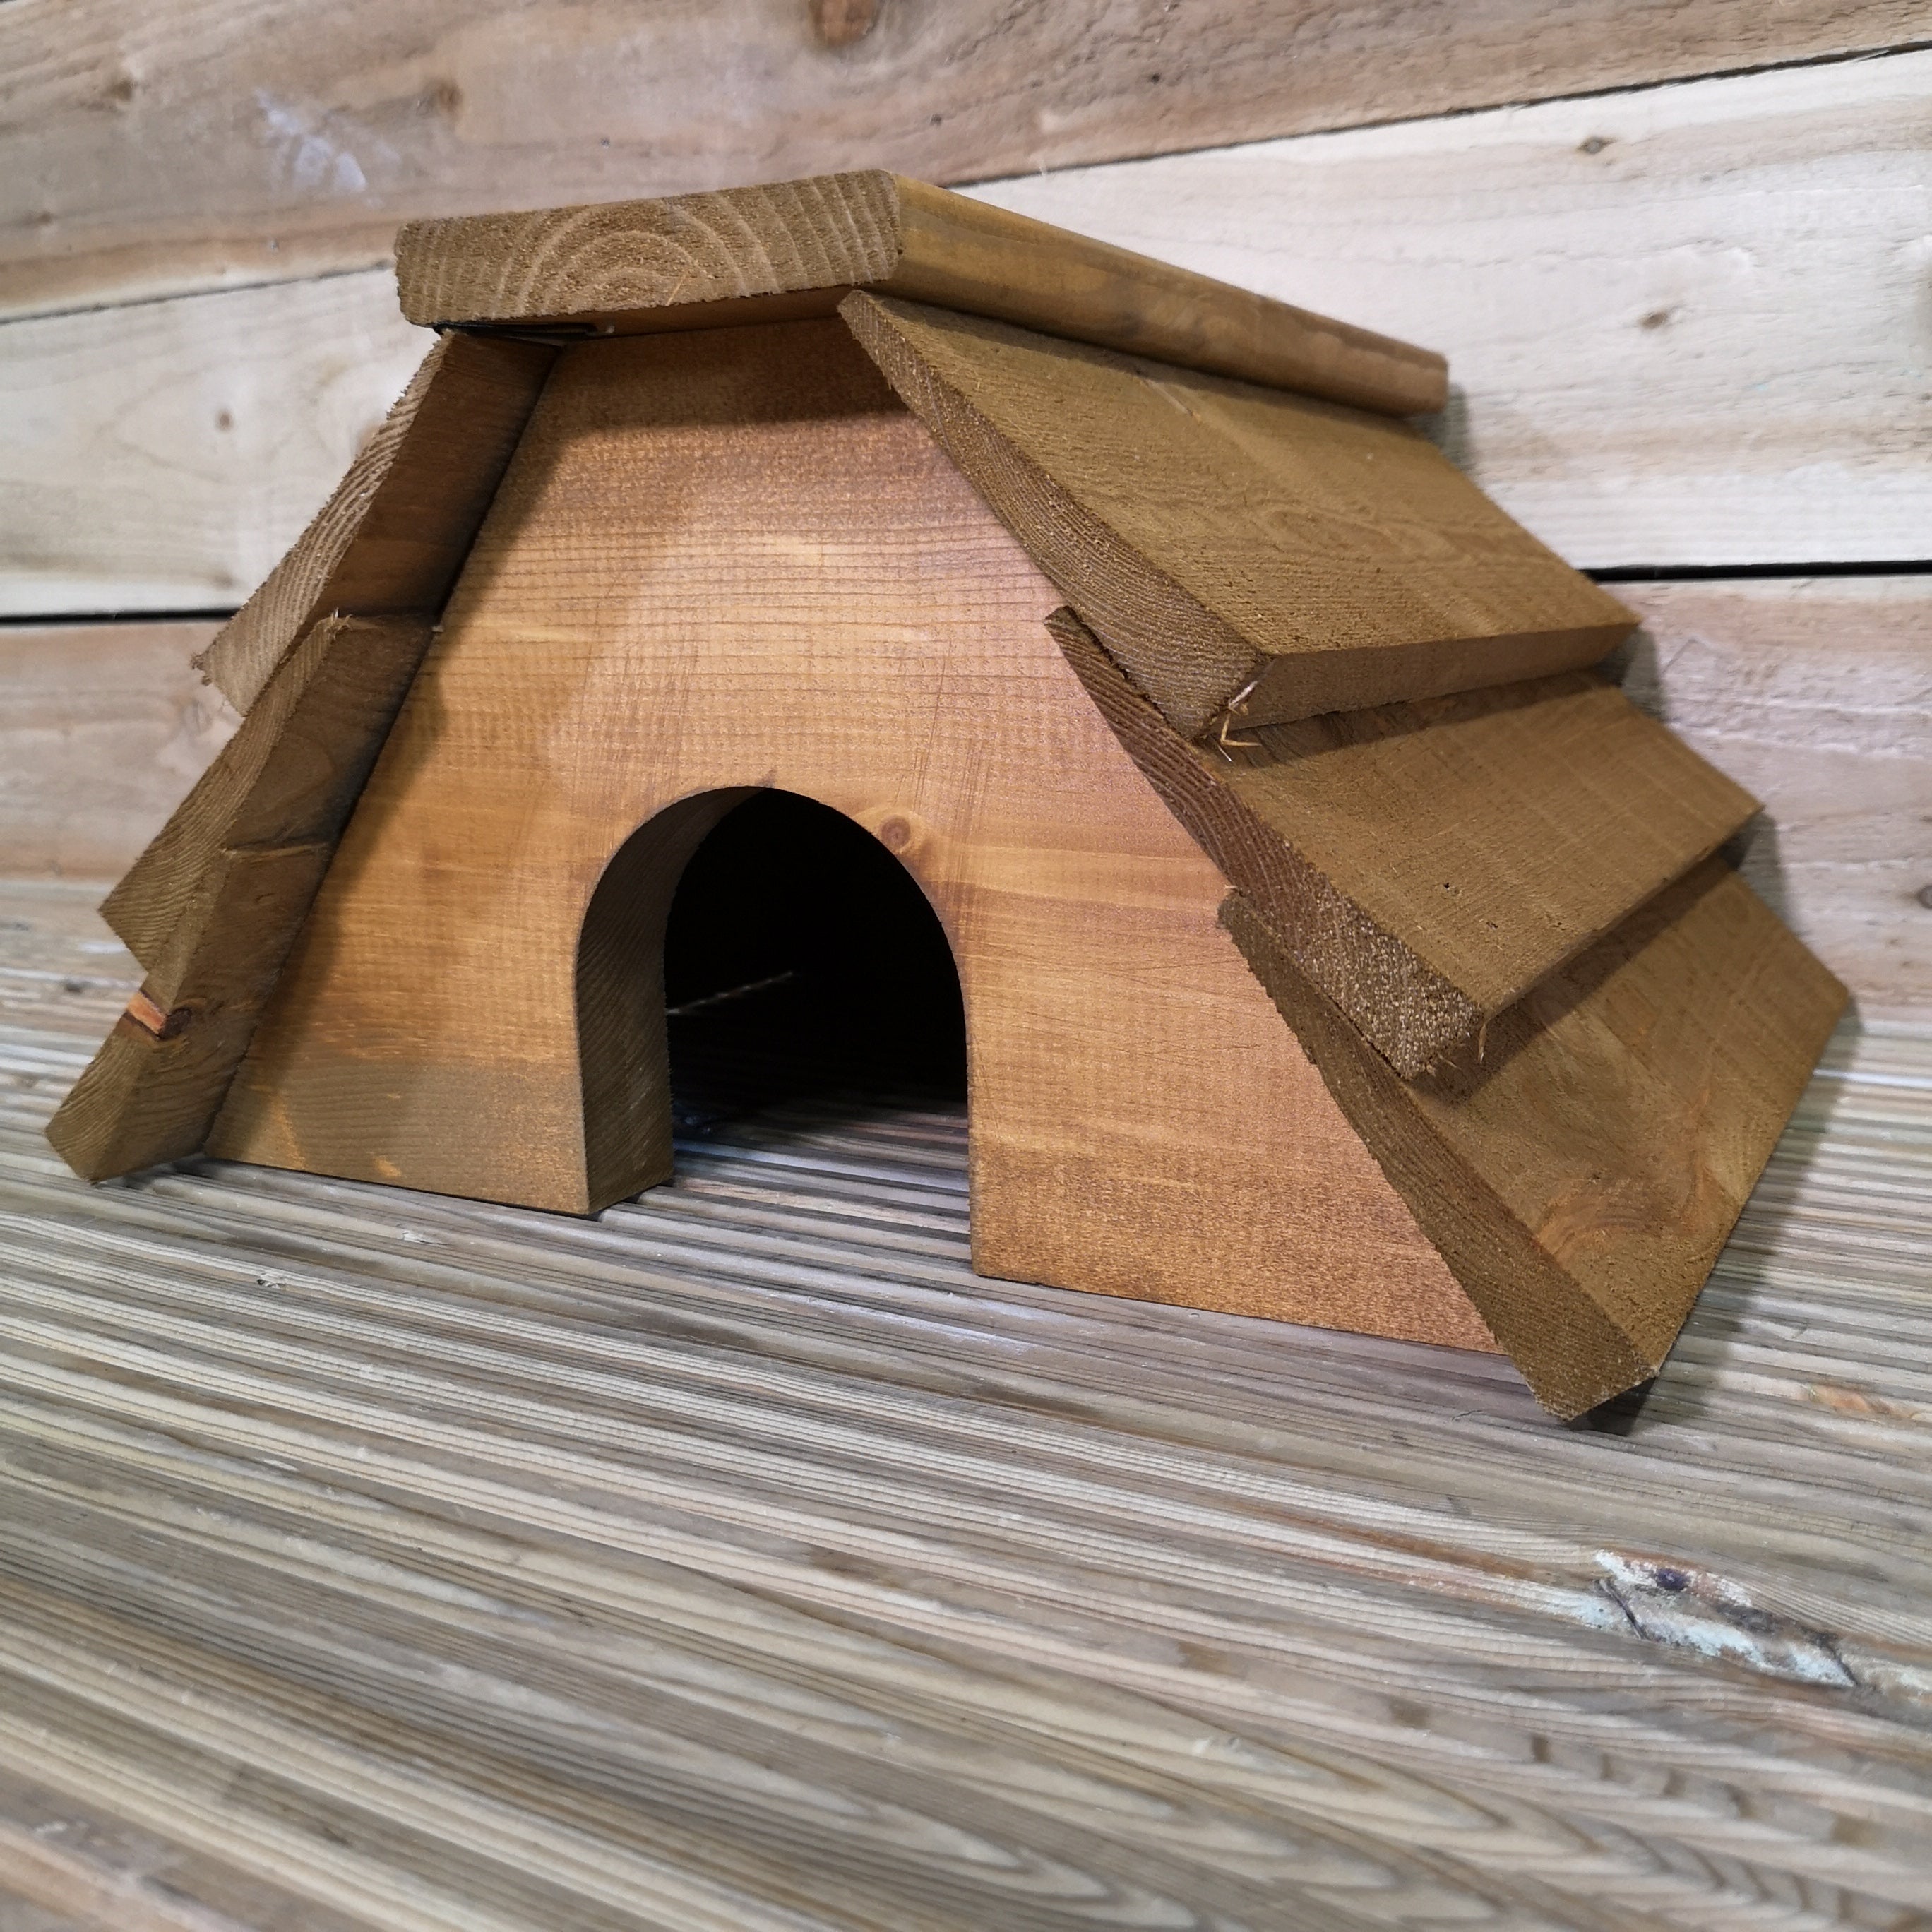 Tom Chambers Rustic Wooden Hedgehog House Habitat for Garden with Slatted Roof